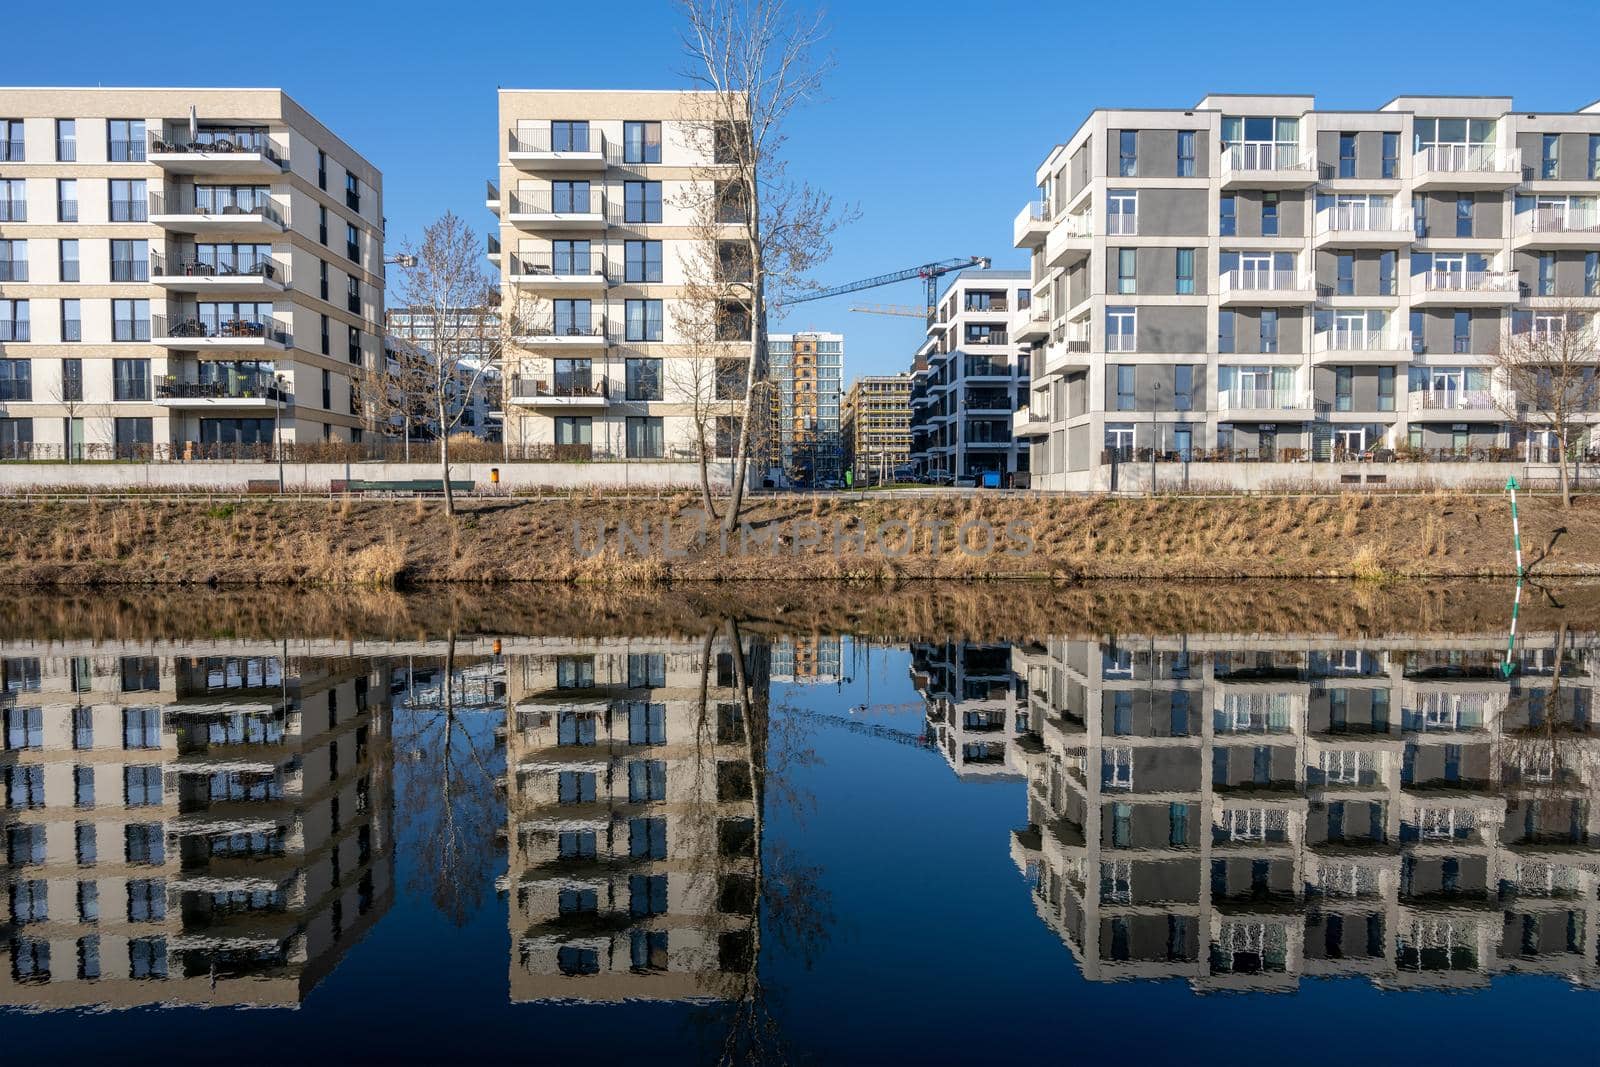 Modern apartment buildings in Berlin, Germany, reflecting in a small canal